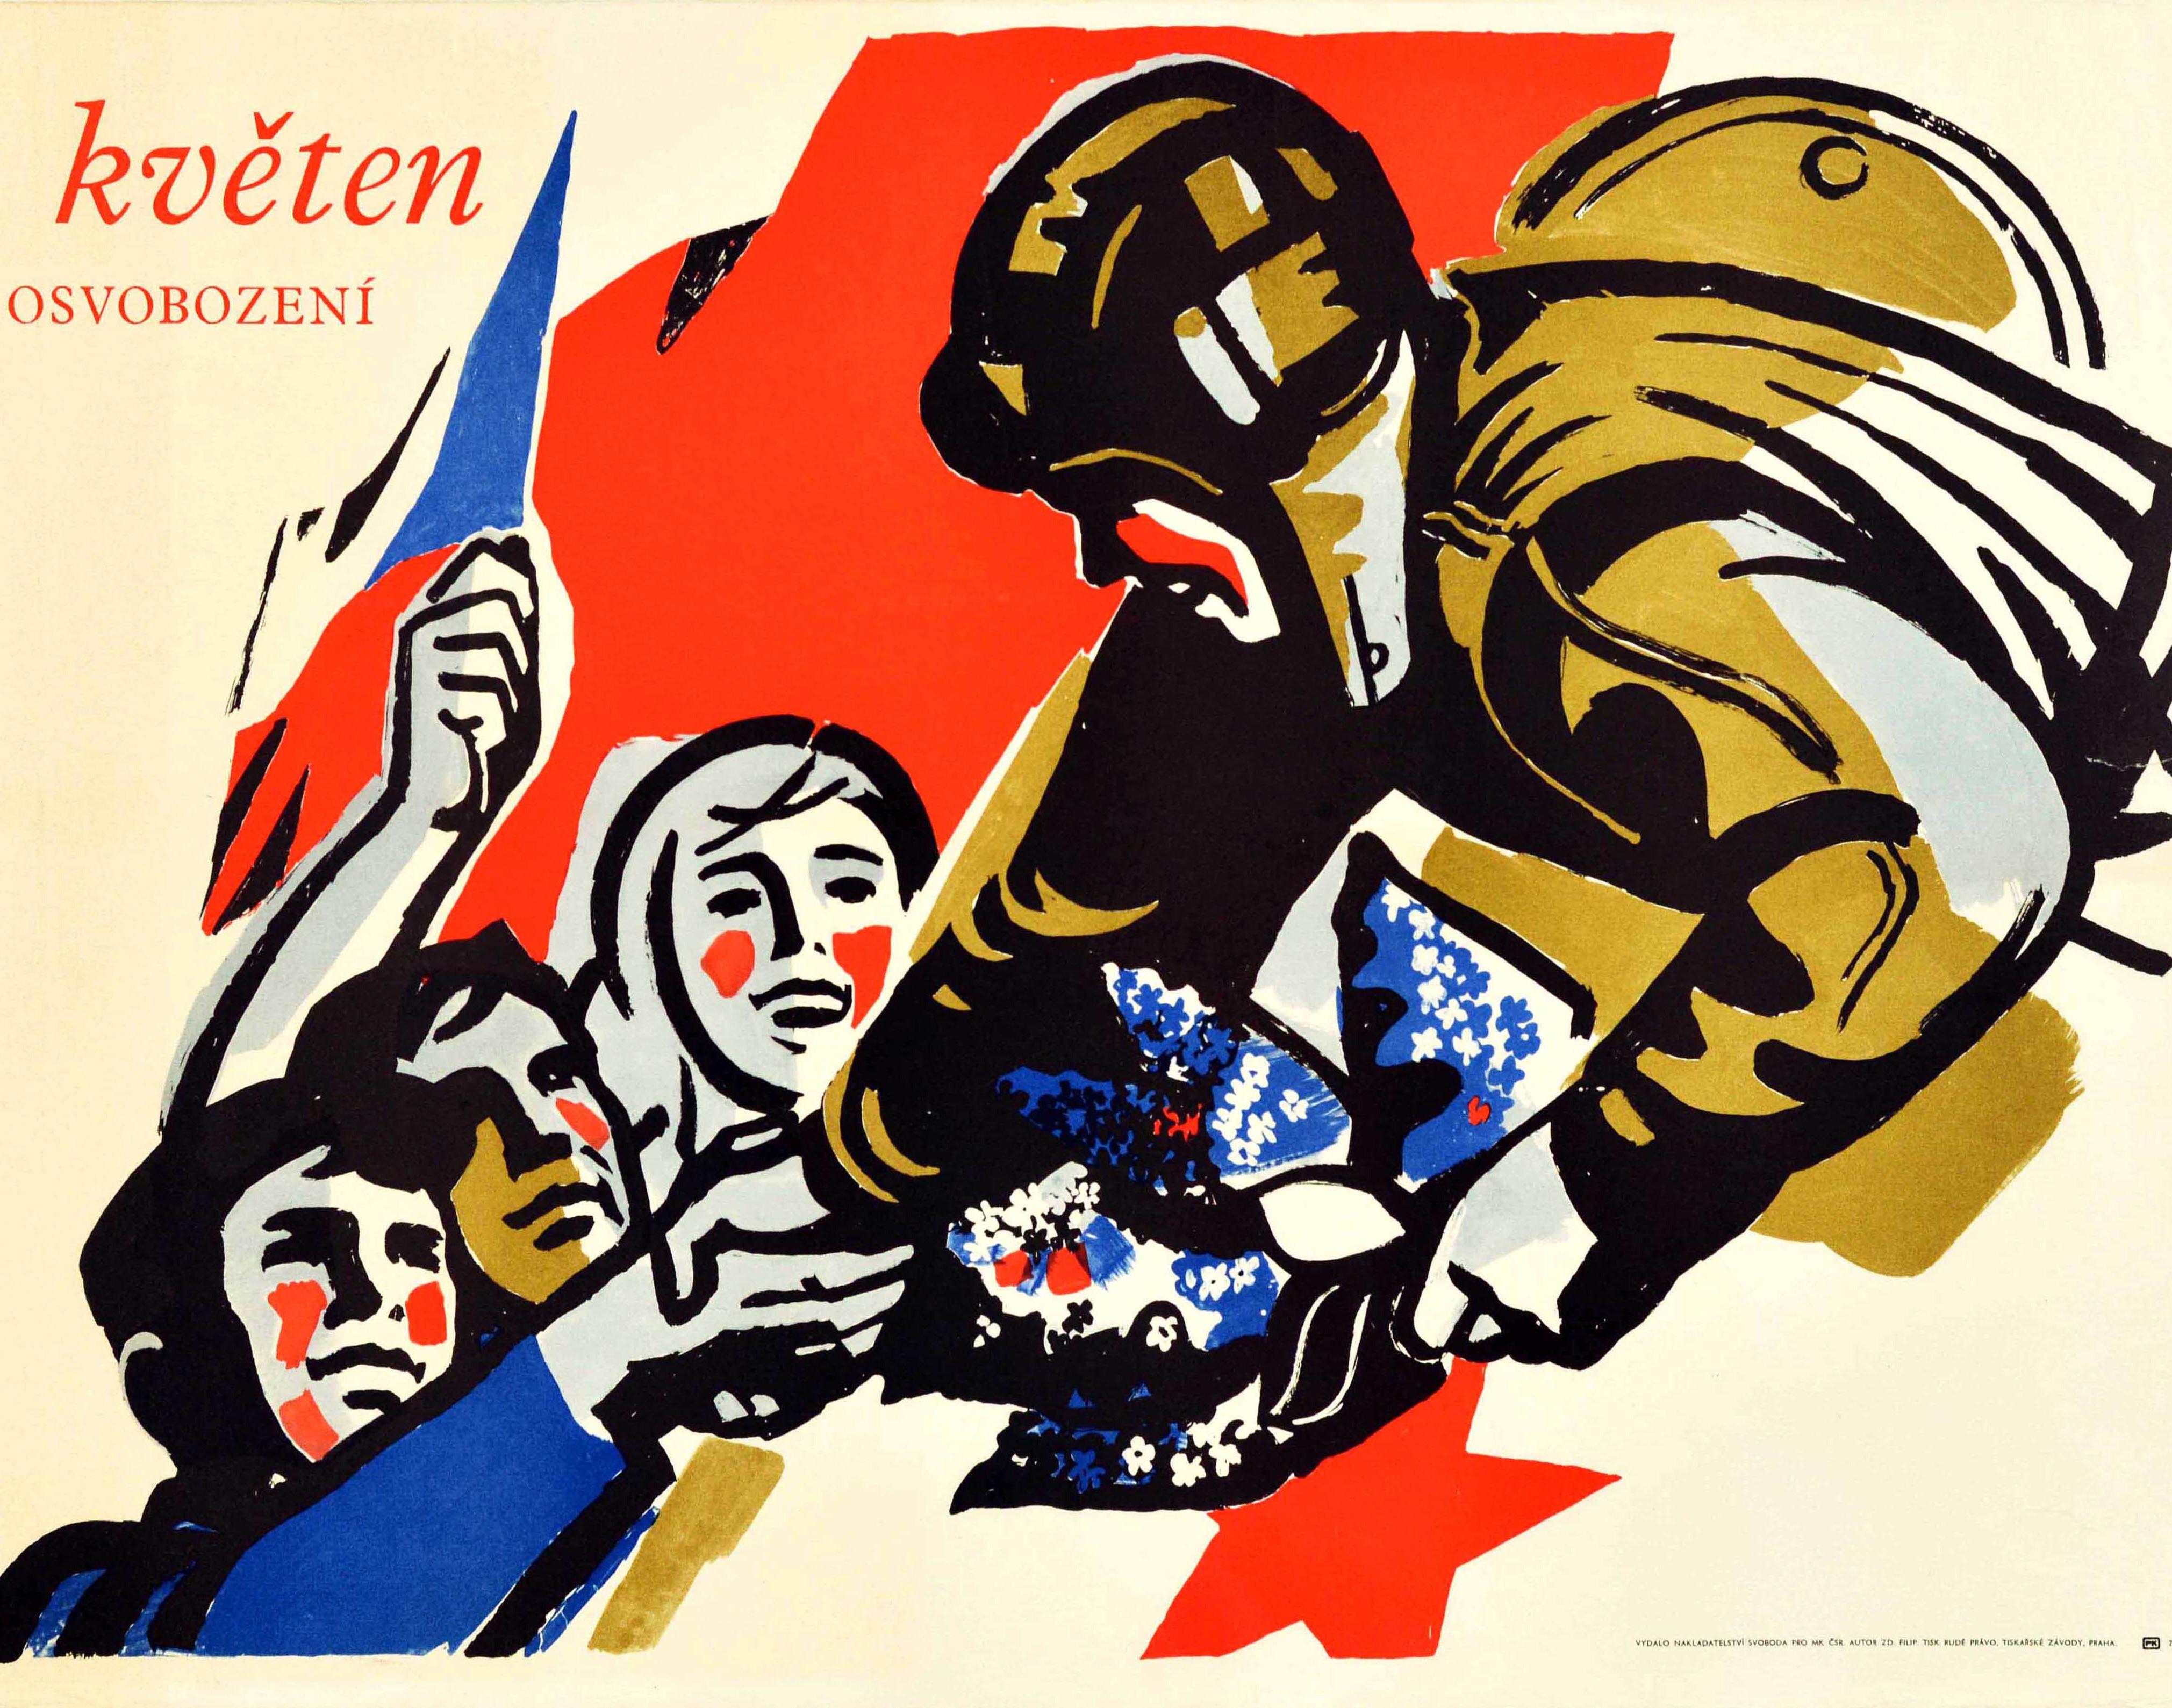 Original vintage poster celebrating freedom on the anniversary of the end of World War Two - May 9 Liberation Day / 9. Kveten Den Osvobozeni. Colourful artwork depicting a smiling soldier holding flowers and shaking hands with a man next to another